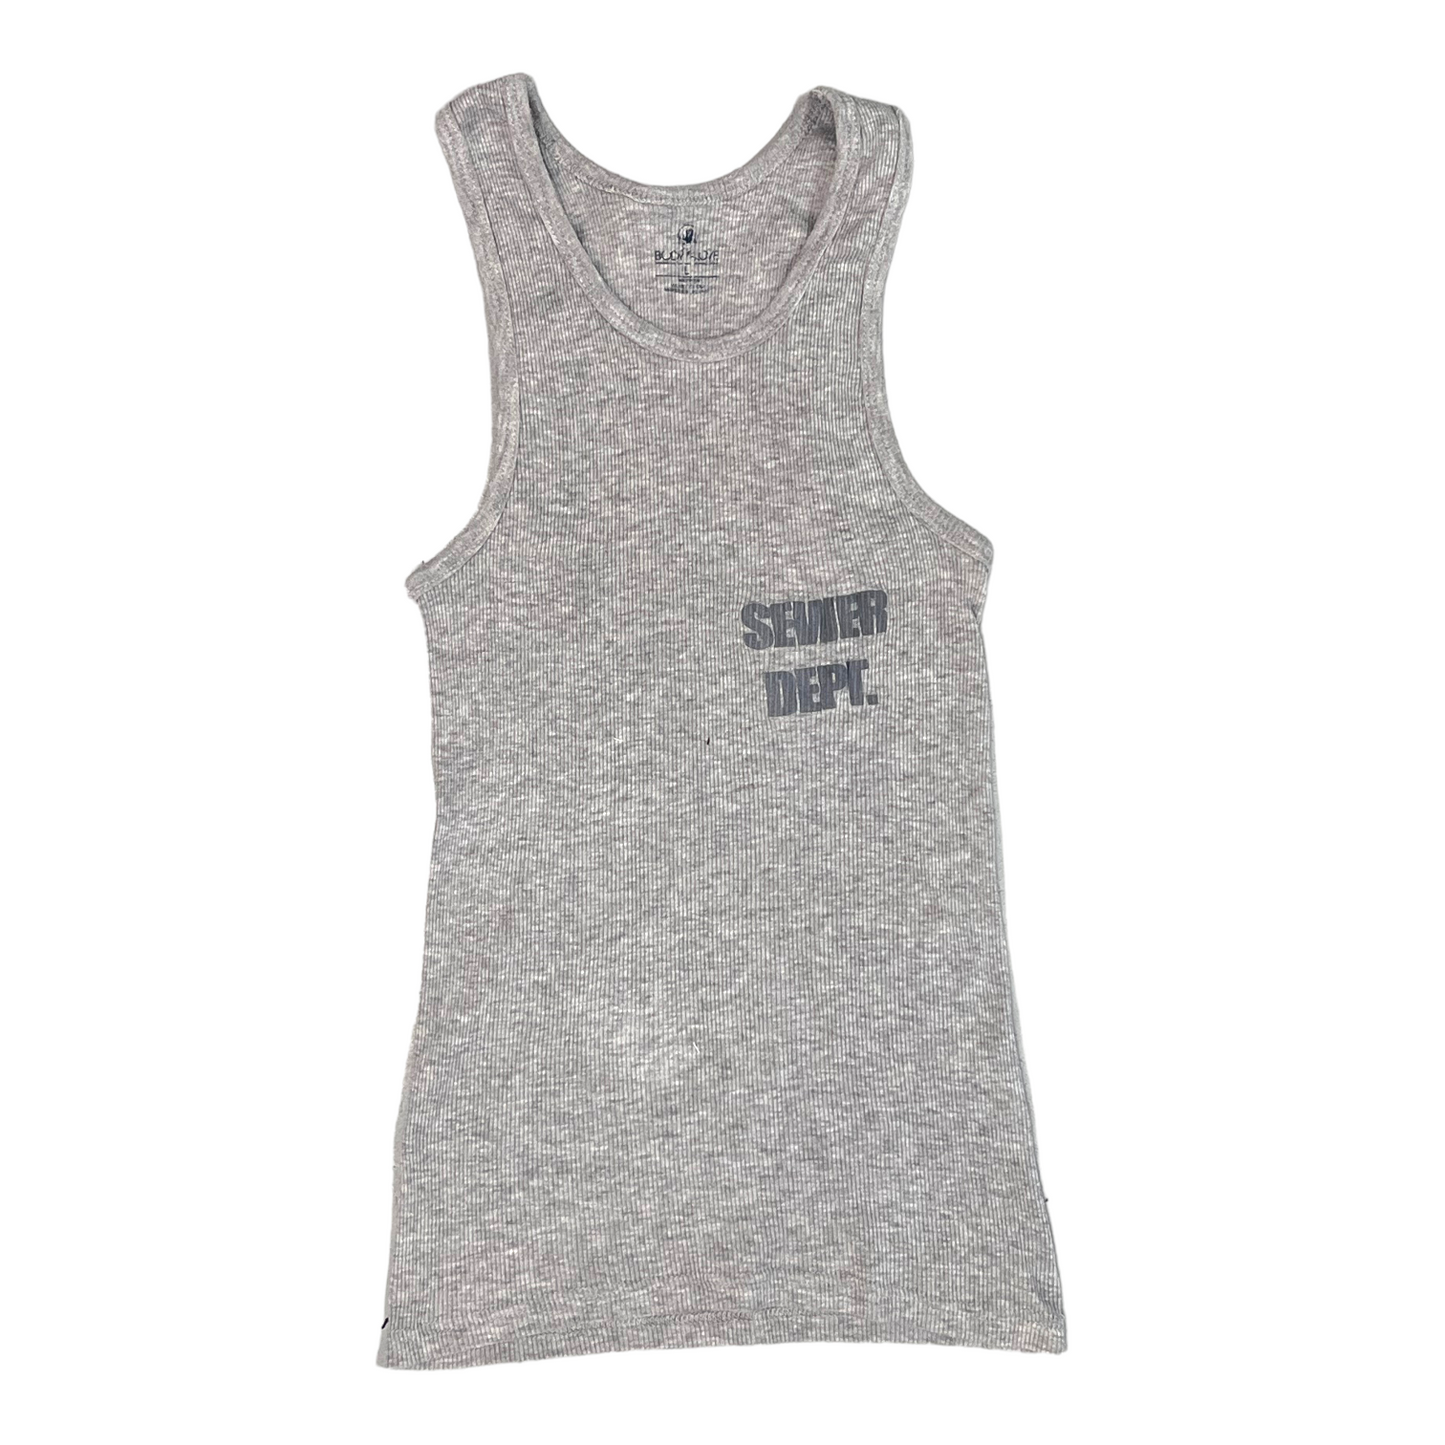 Sewer Dept Wife Beater Gray